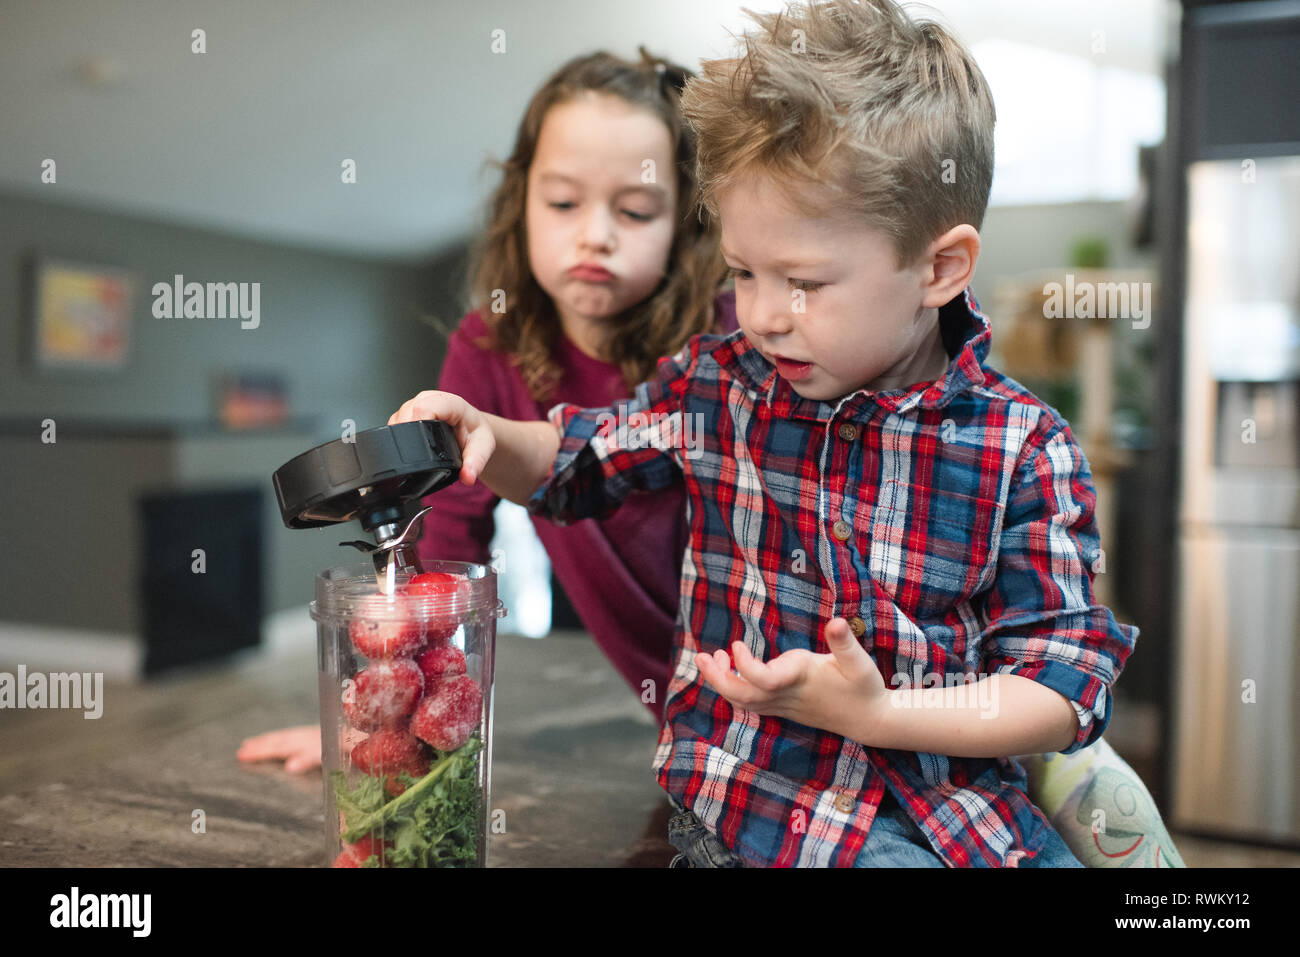 Little girl watching brother cover blender filled with beets and vegetable Stock Photo